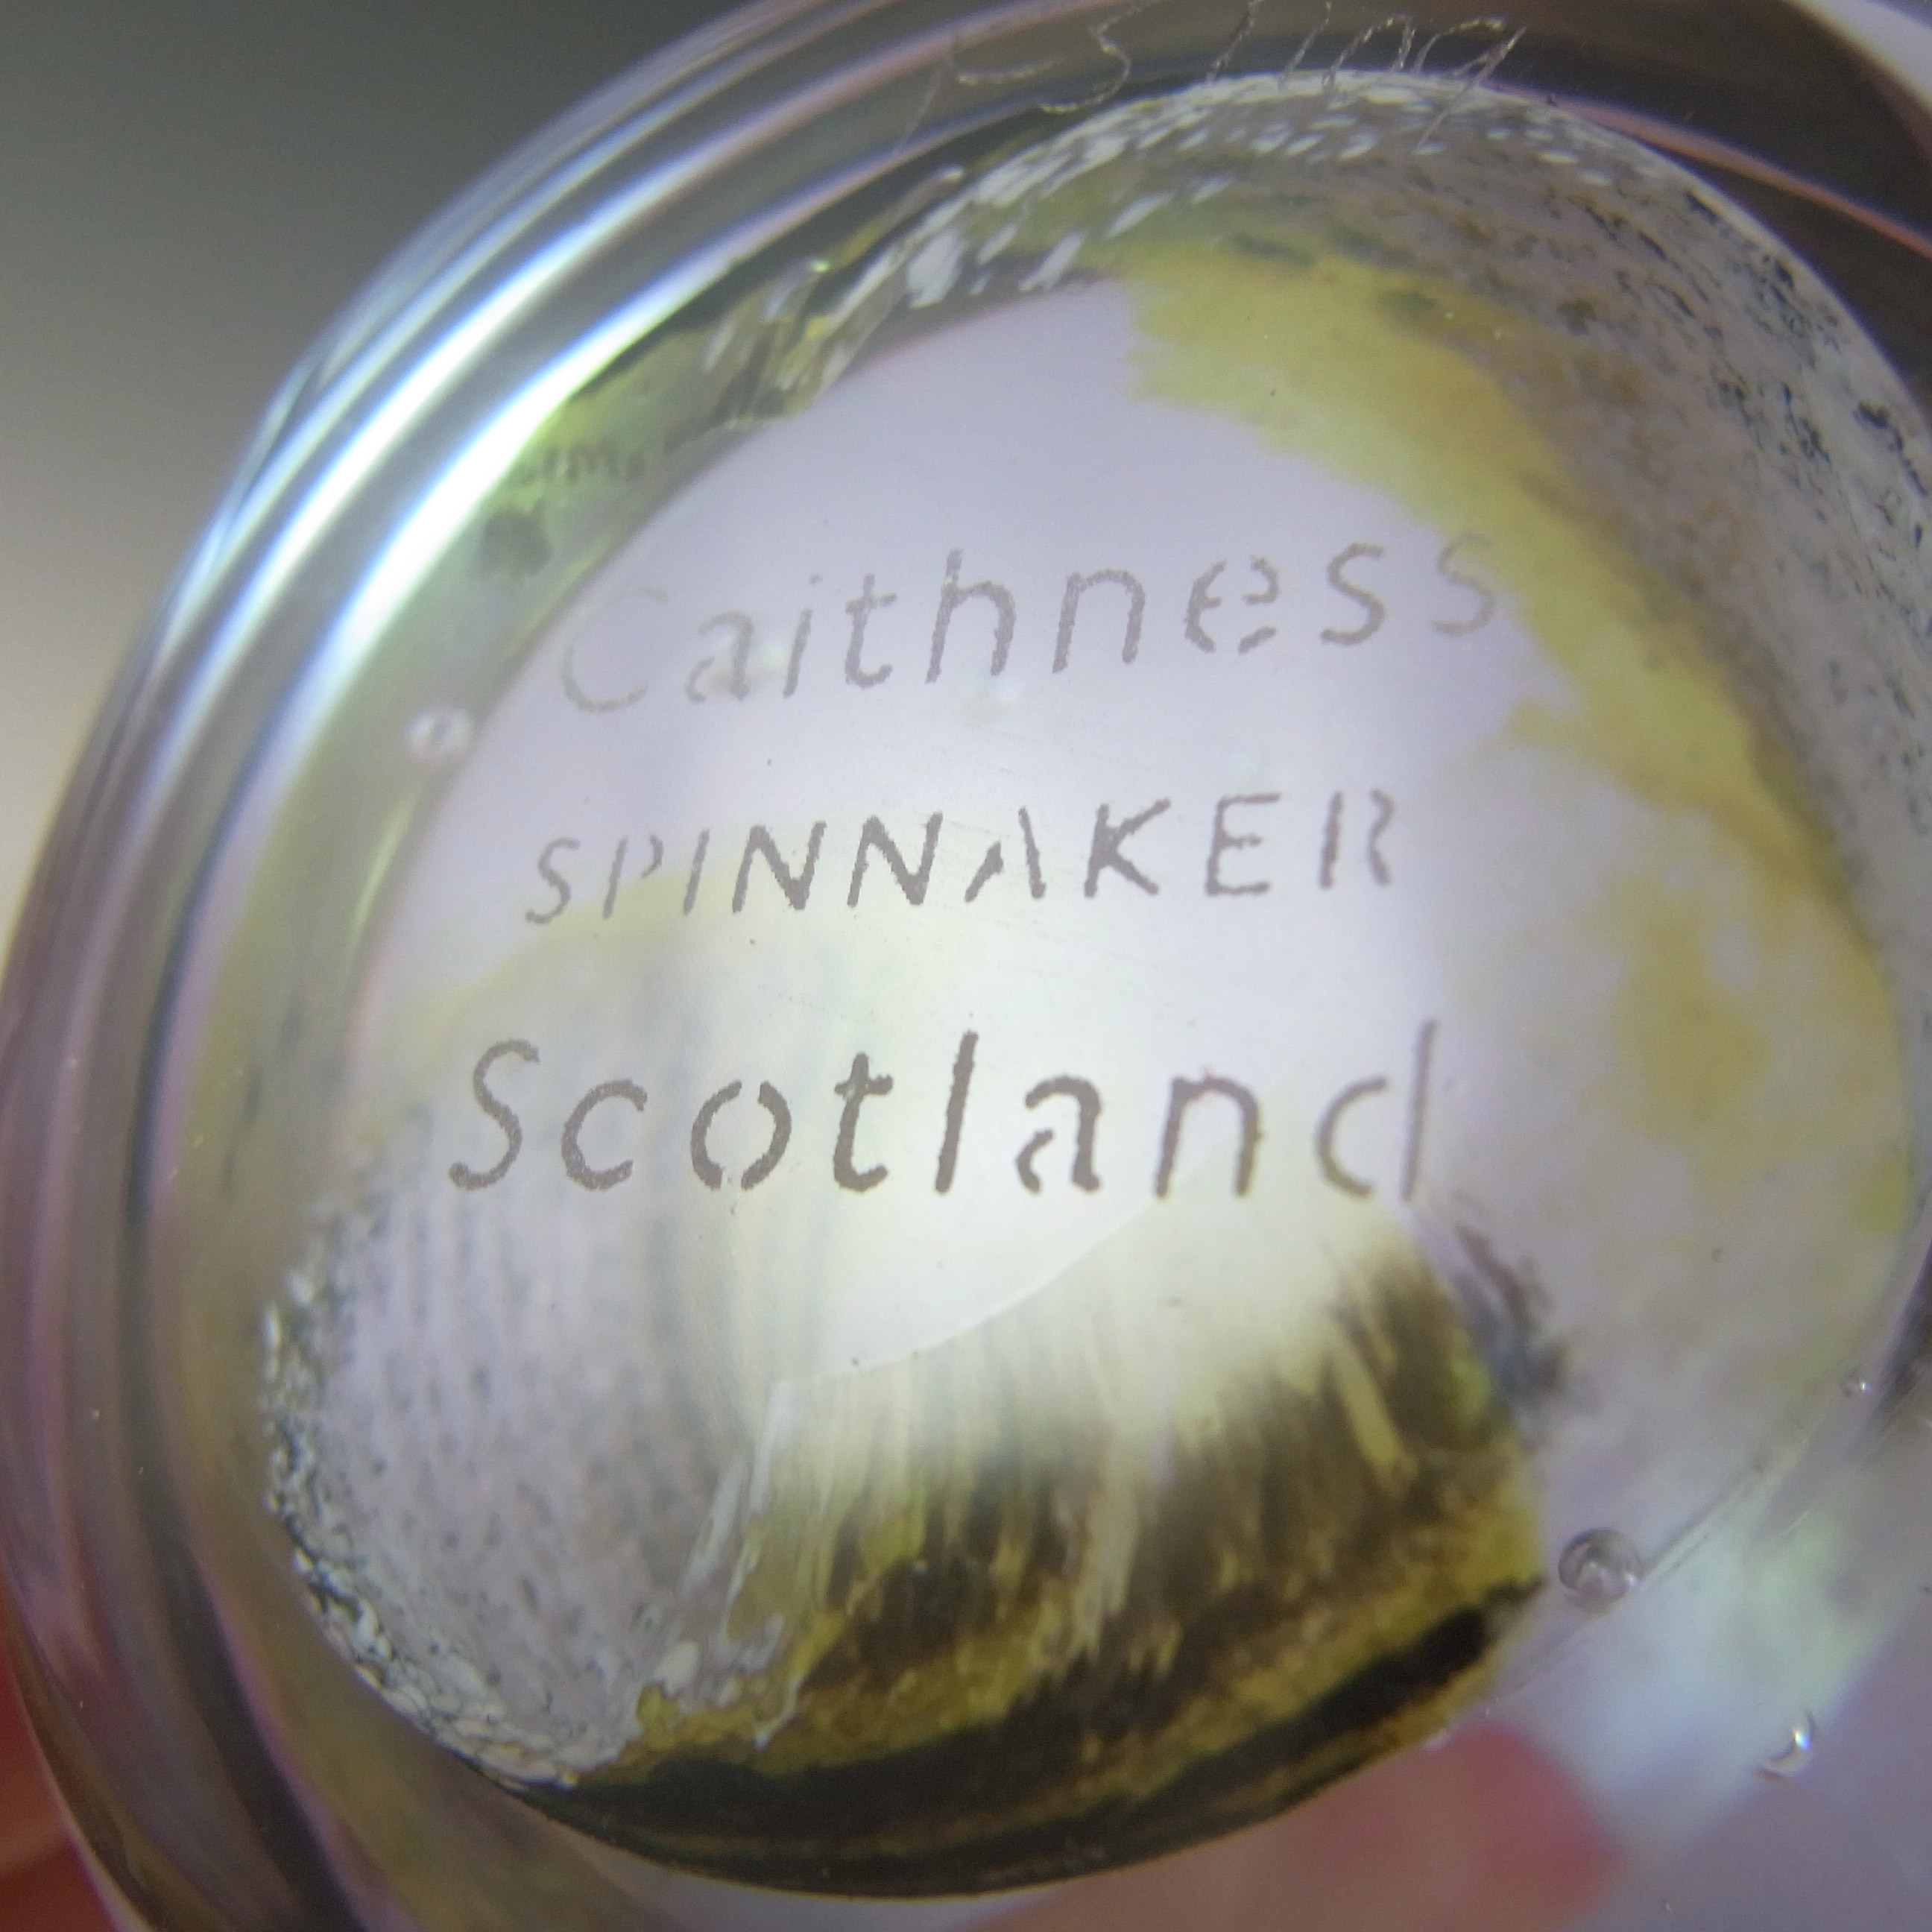 MARKED Caithness Yellow & Black Glass "Spinnaker" Paperweight - Click Image to Close